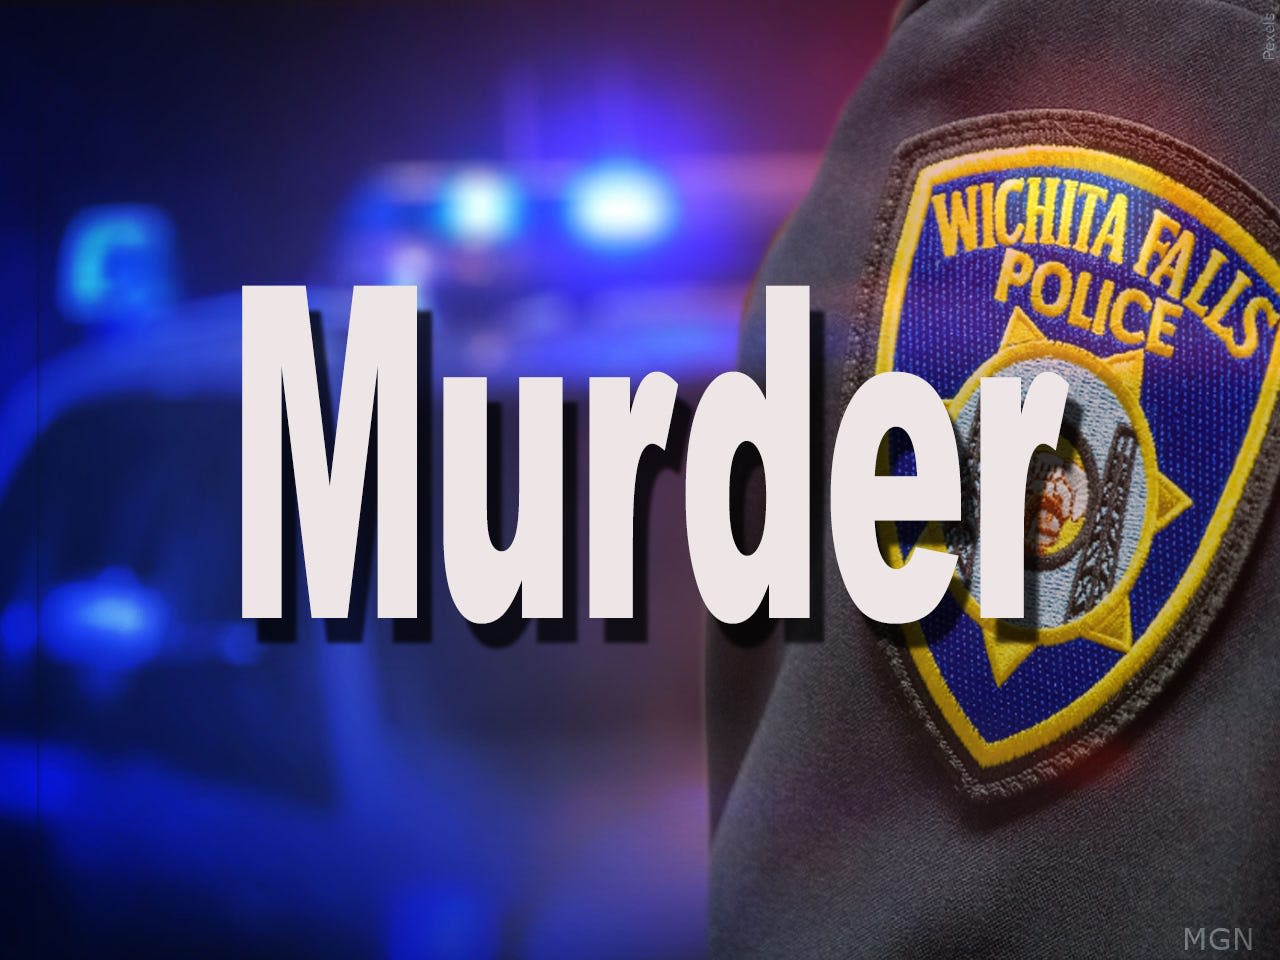 Wichita Falls police release names of city's latest murder victims